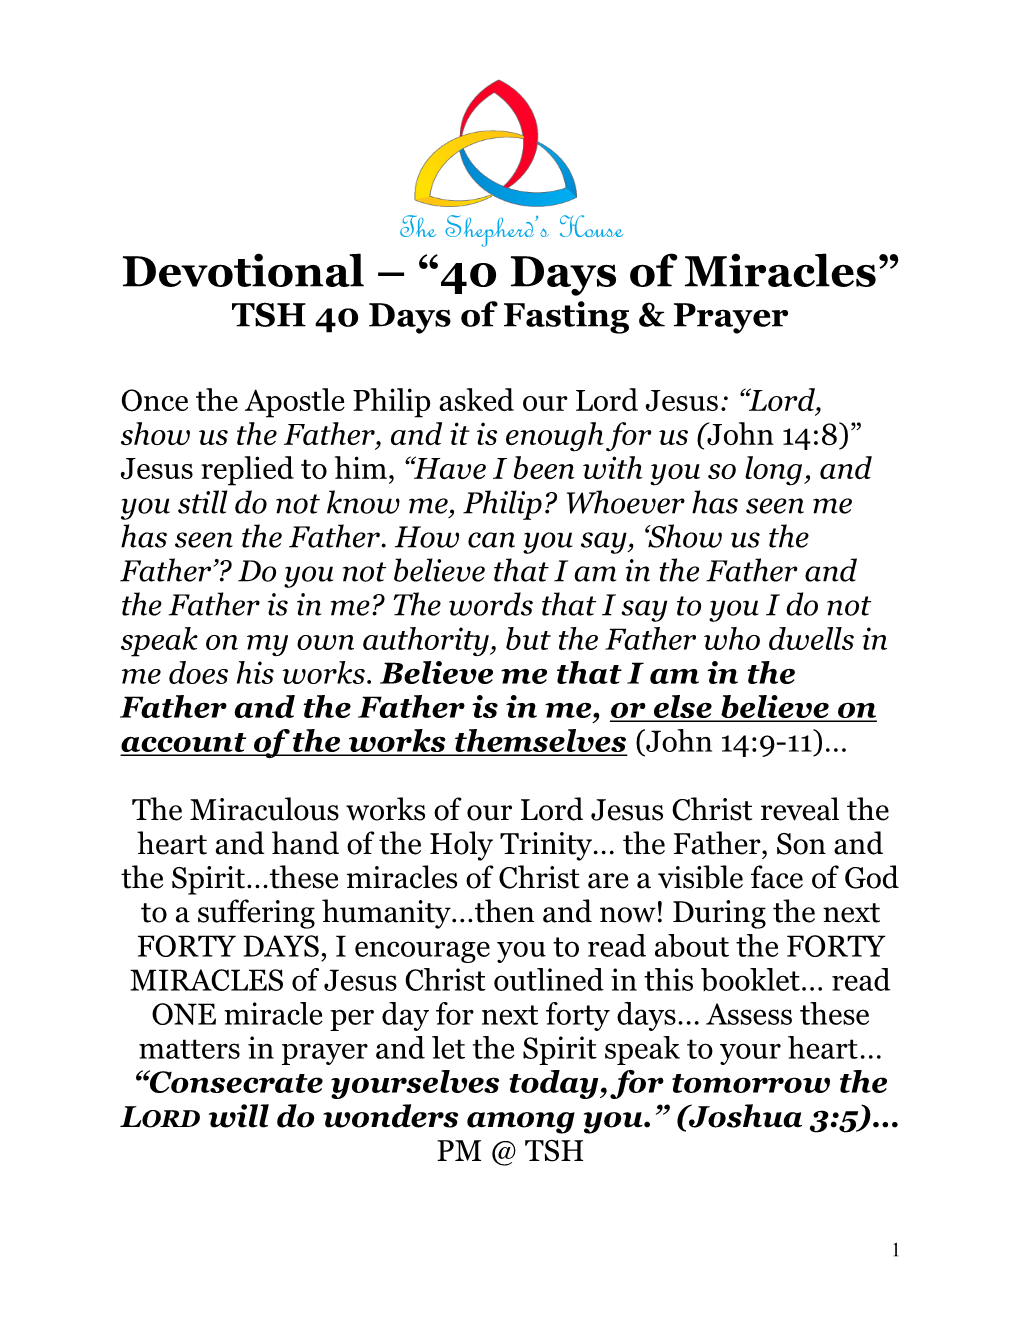 Devotional – “40 Days of Miracles” TSH 40 Days of Fasting & Prayer